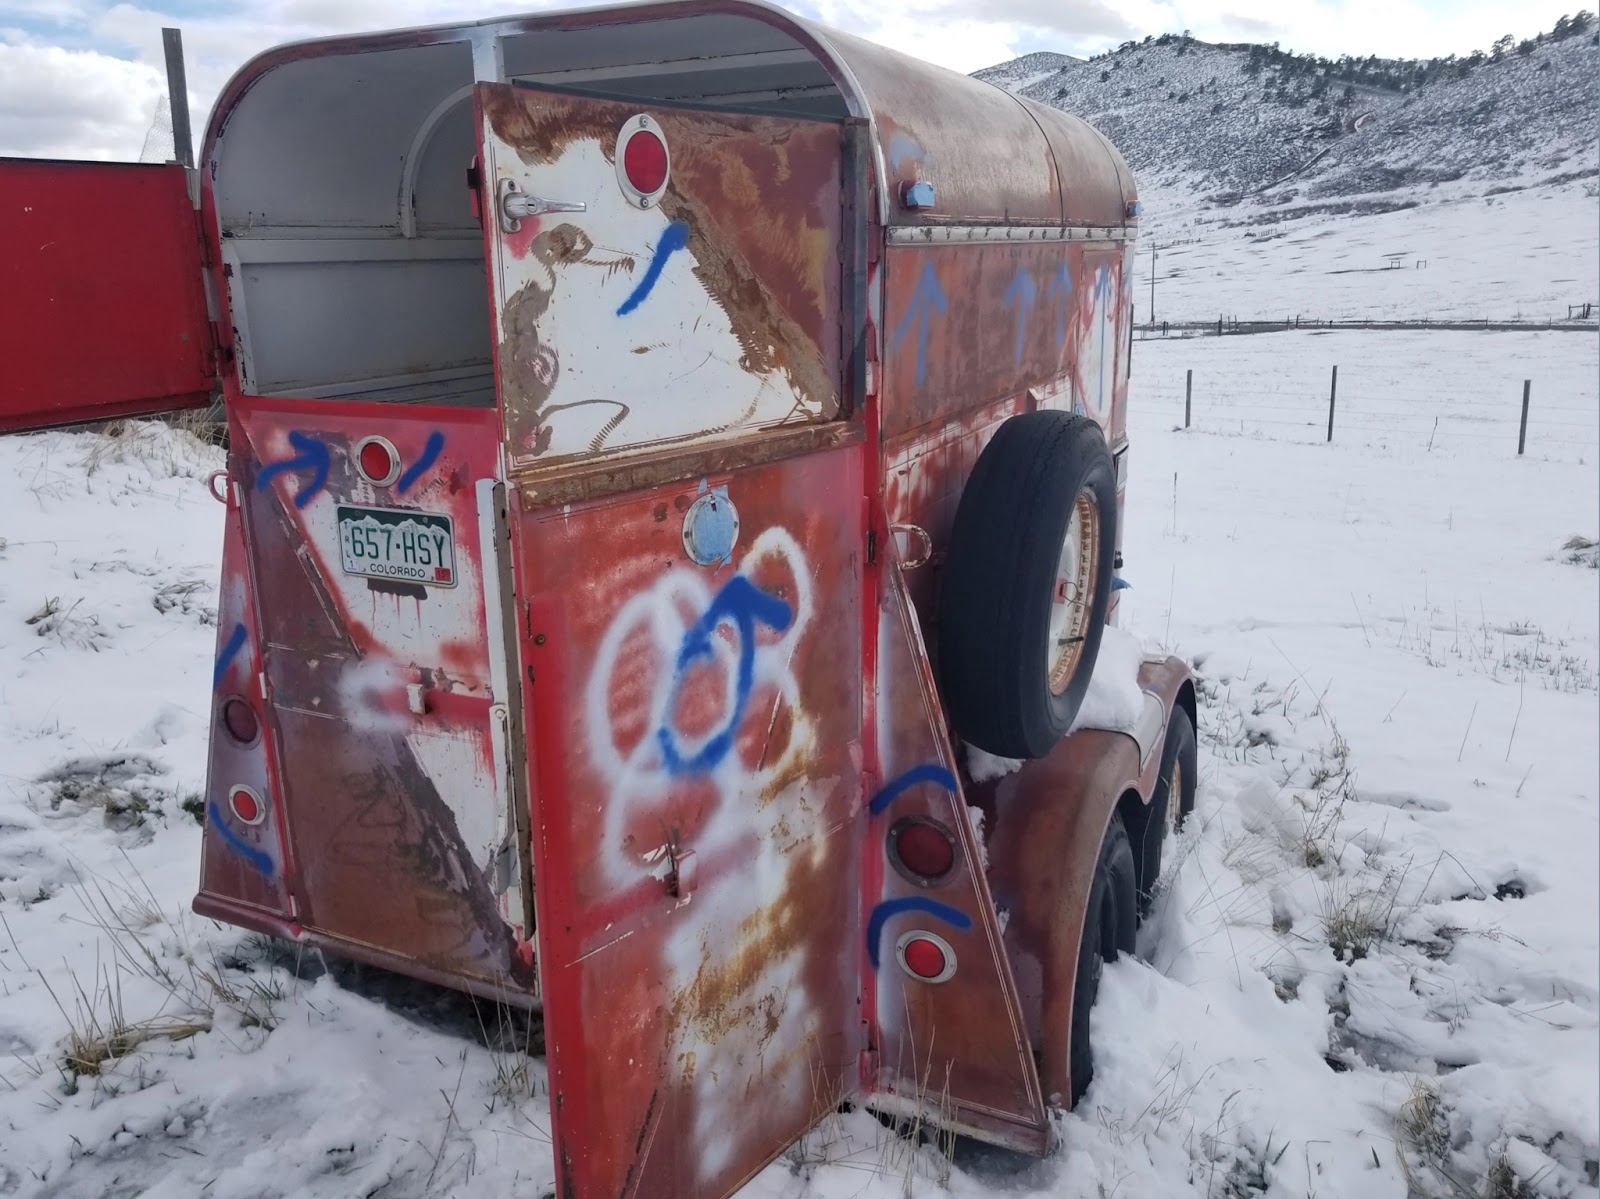 A rusted horse trailer spray-painted with graffiti rests in a snowy field at the base of the Colorado foothills.